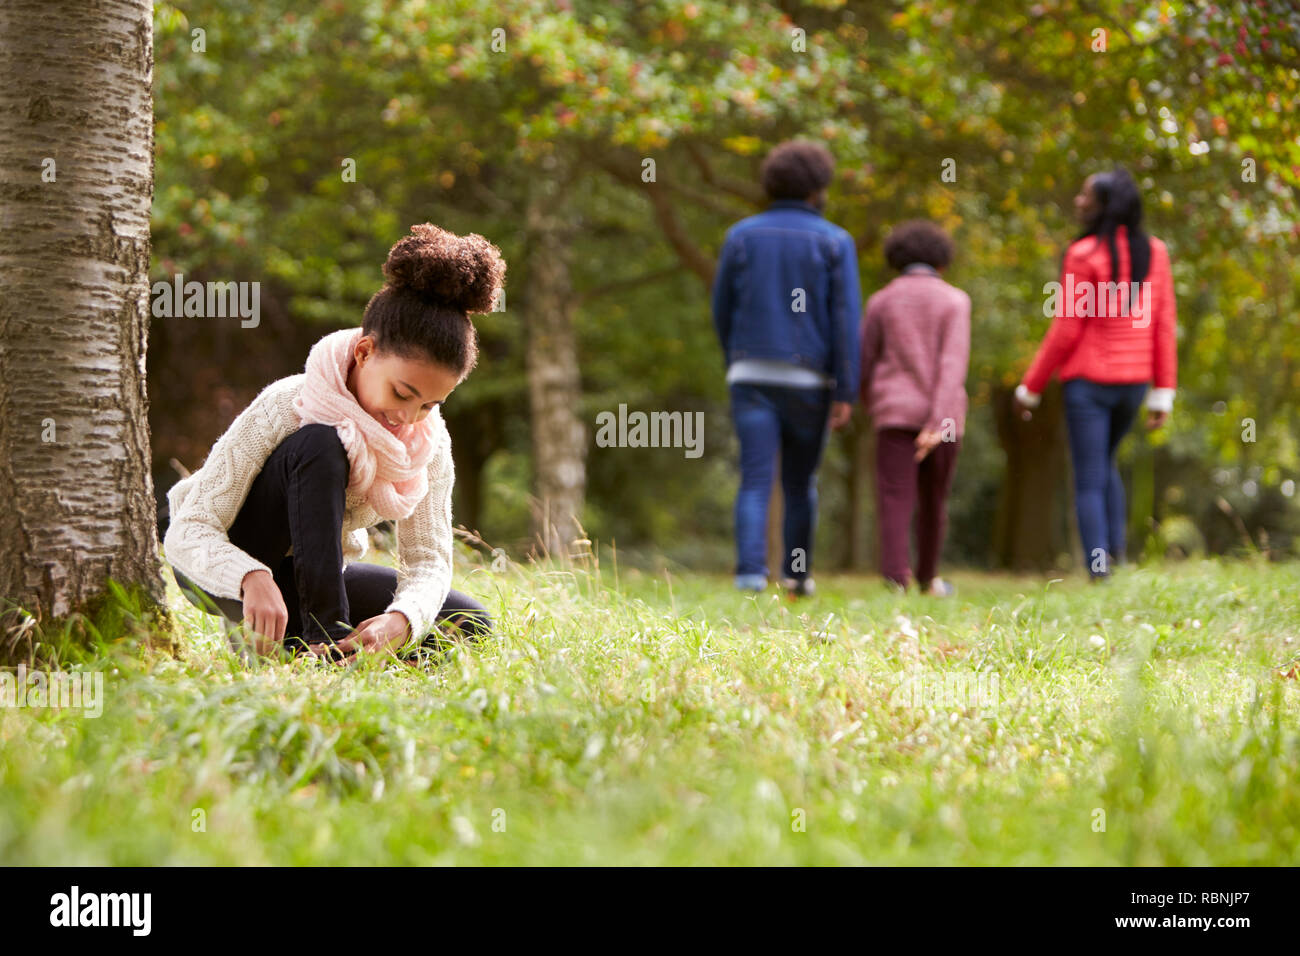 Mixed race girl kneeling in the park to tie her shoe, her family walking in the background, low angle Stock Photo